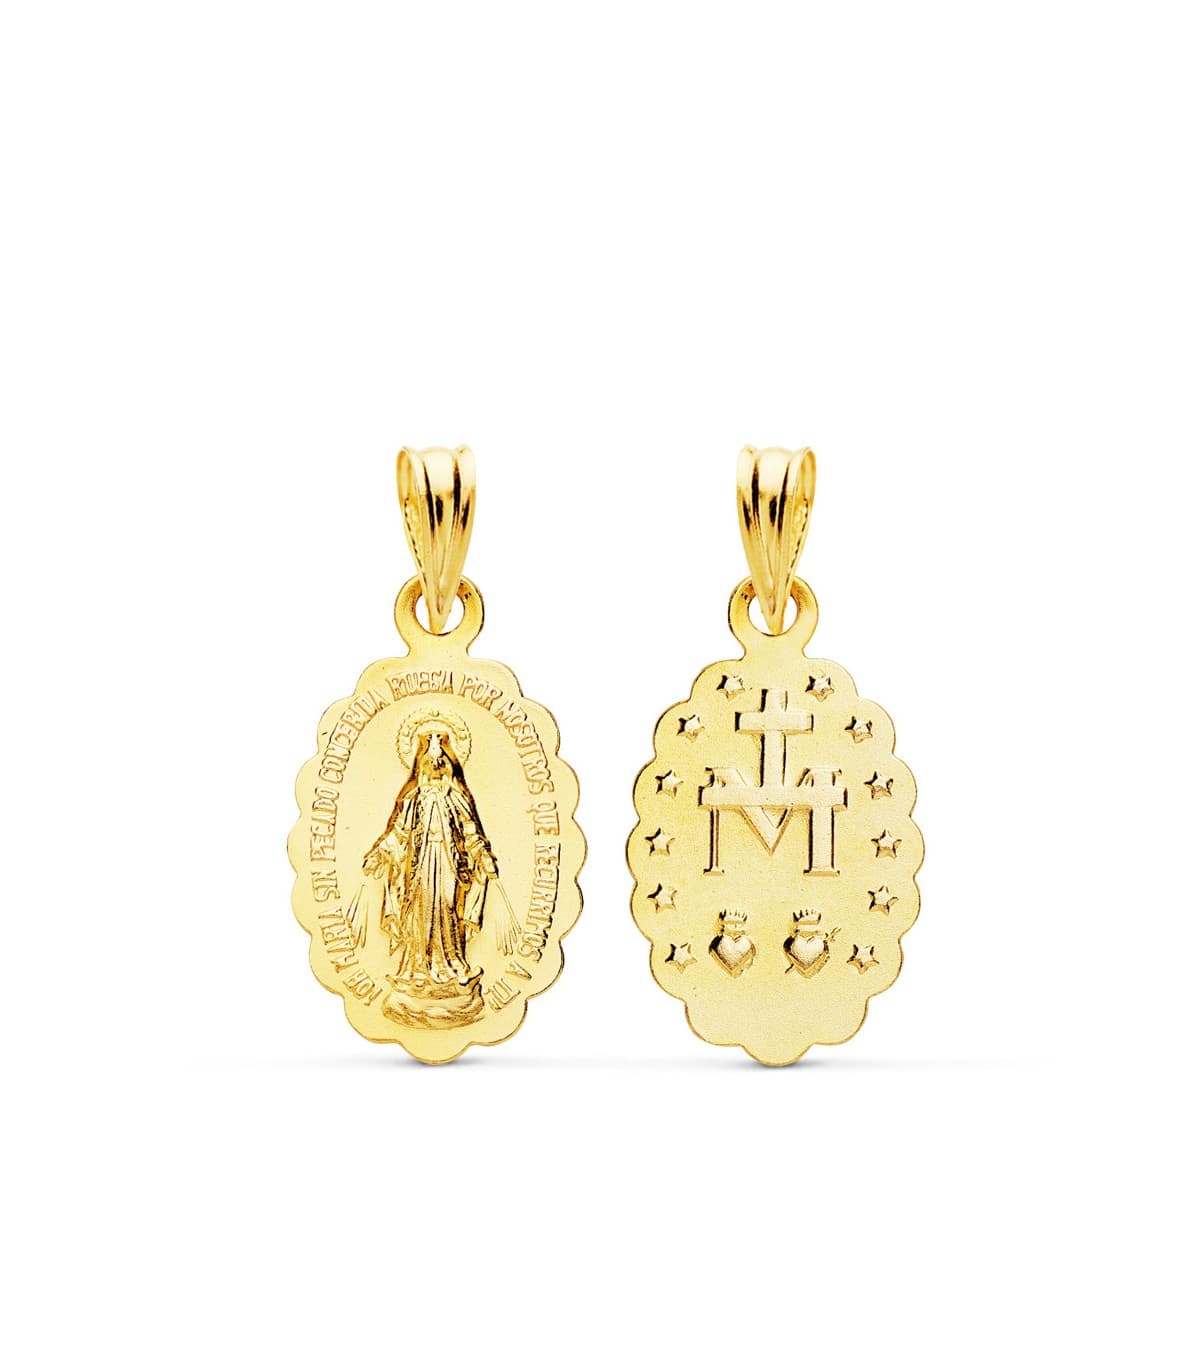 Pendentif Vierge Marie Miraculeuse Or jaune 18 carats Médaille religieuse Taille 15 mm 